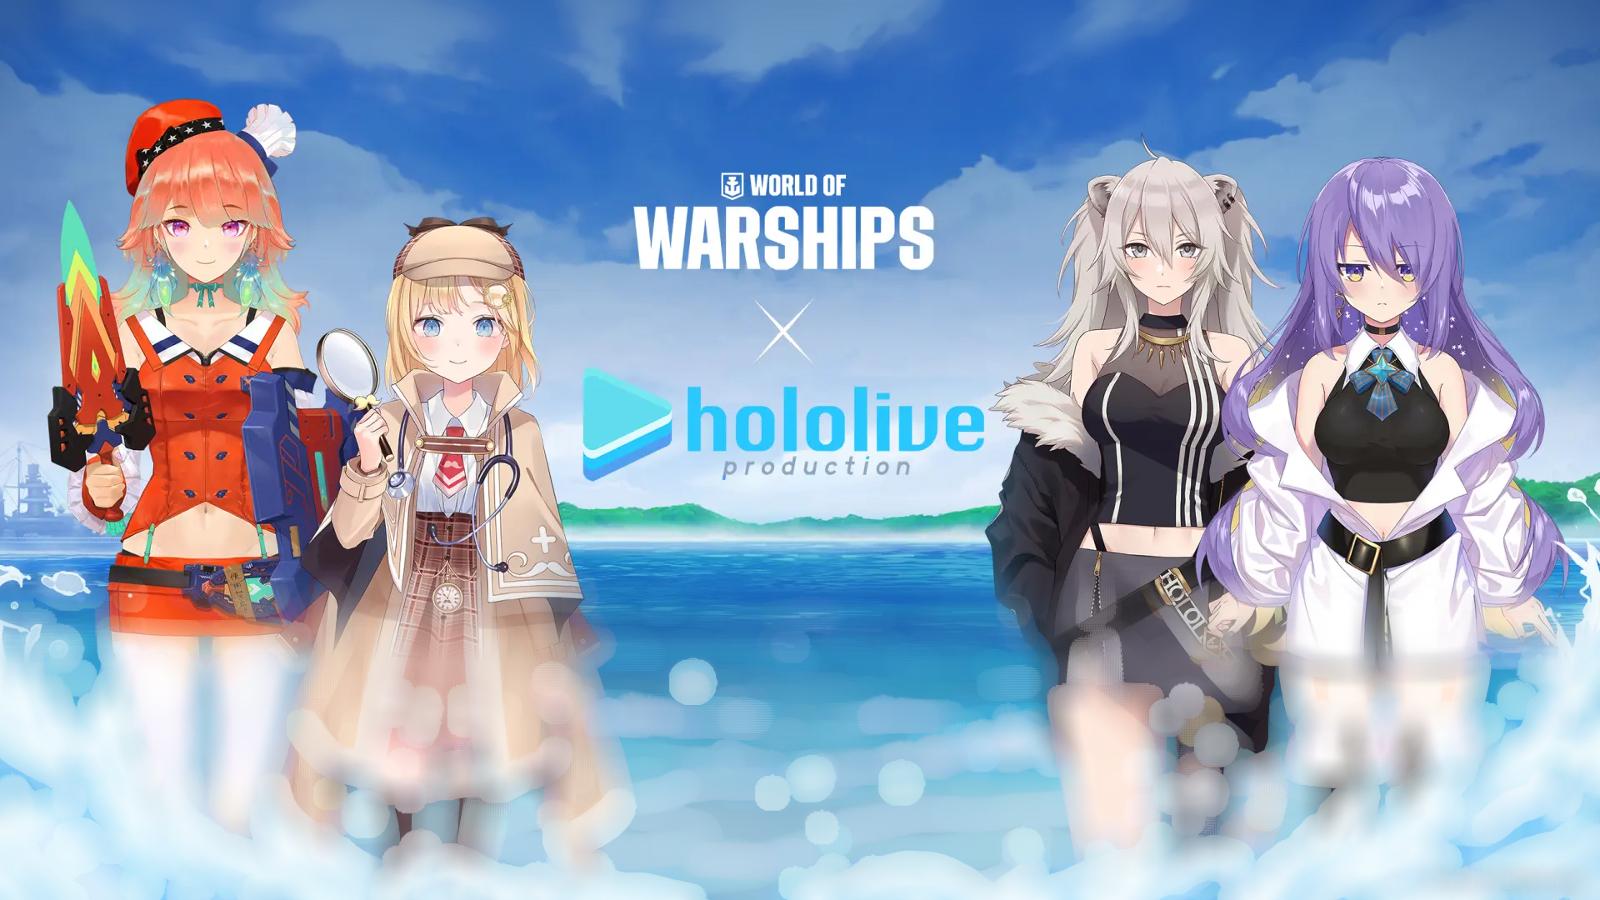 Hololive VTubers posing for World of Warships crossover event